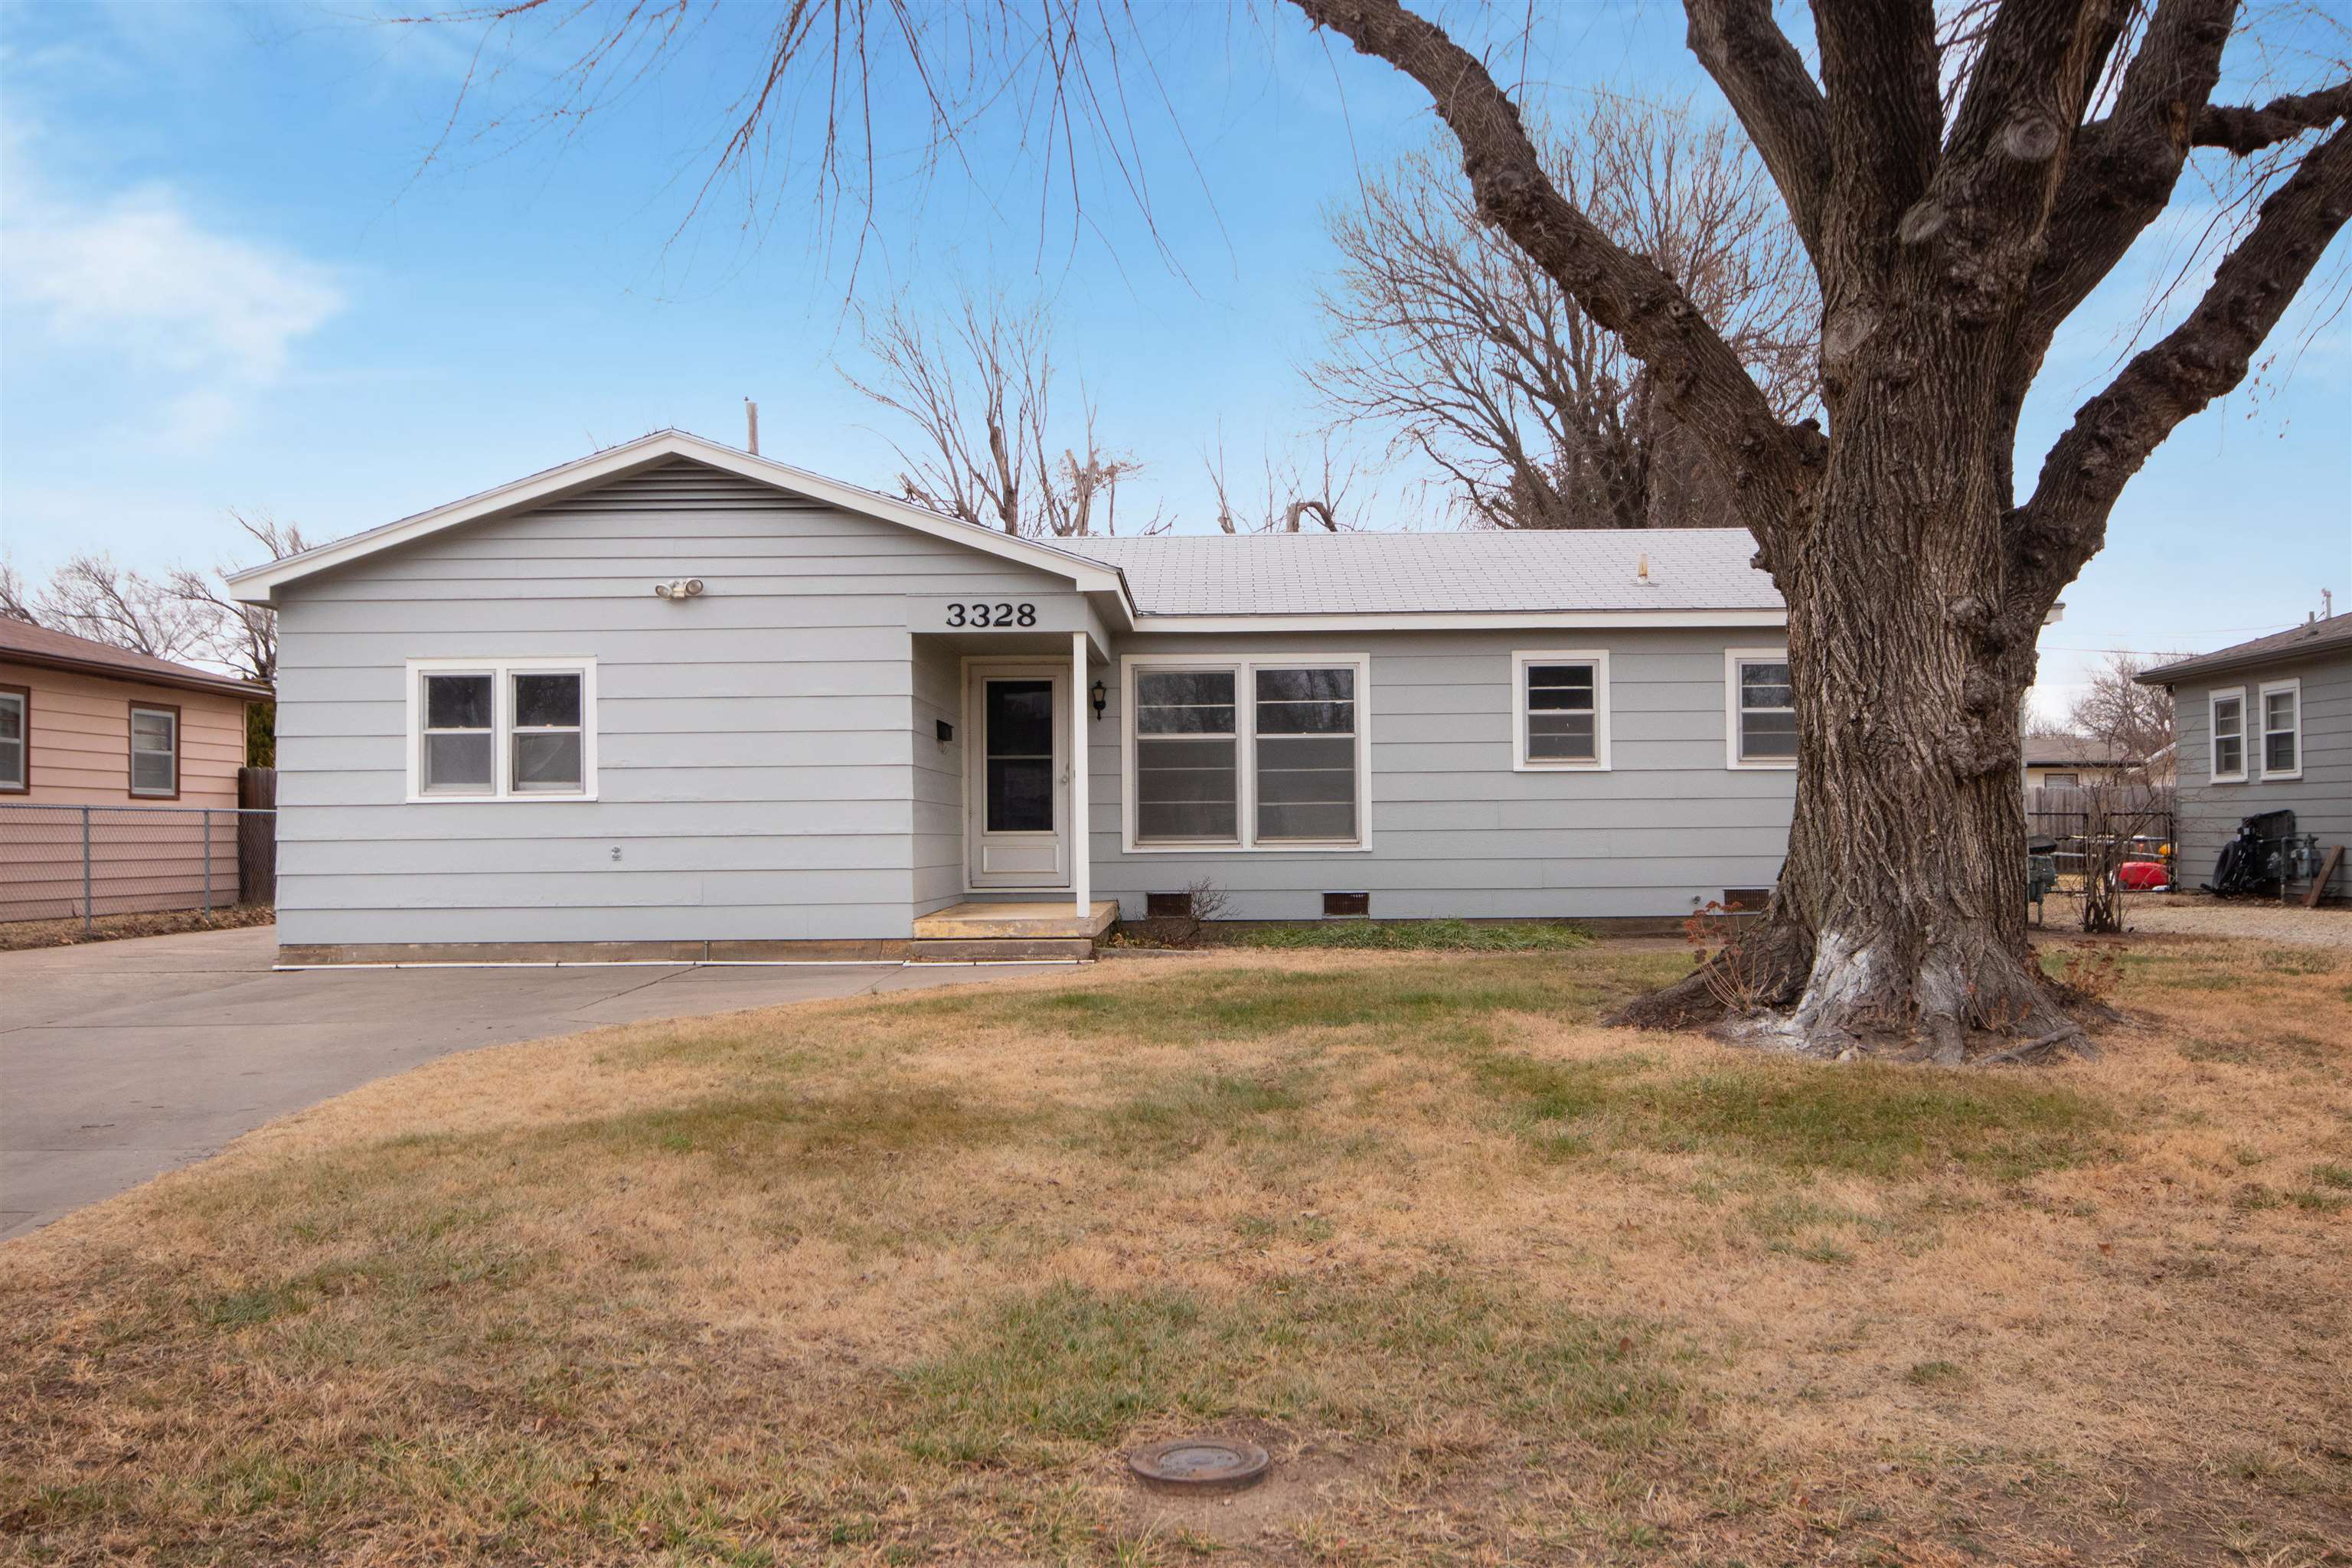 Spacious home in south Wichita with easy commuting near 235 highway and plenty of sport at the South